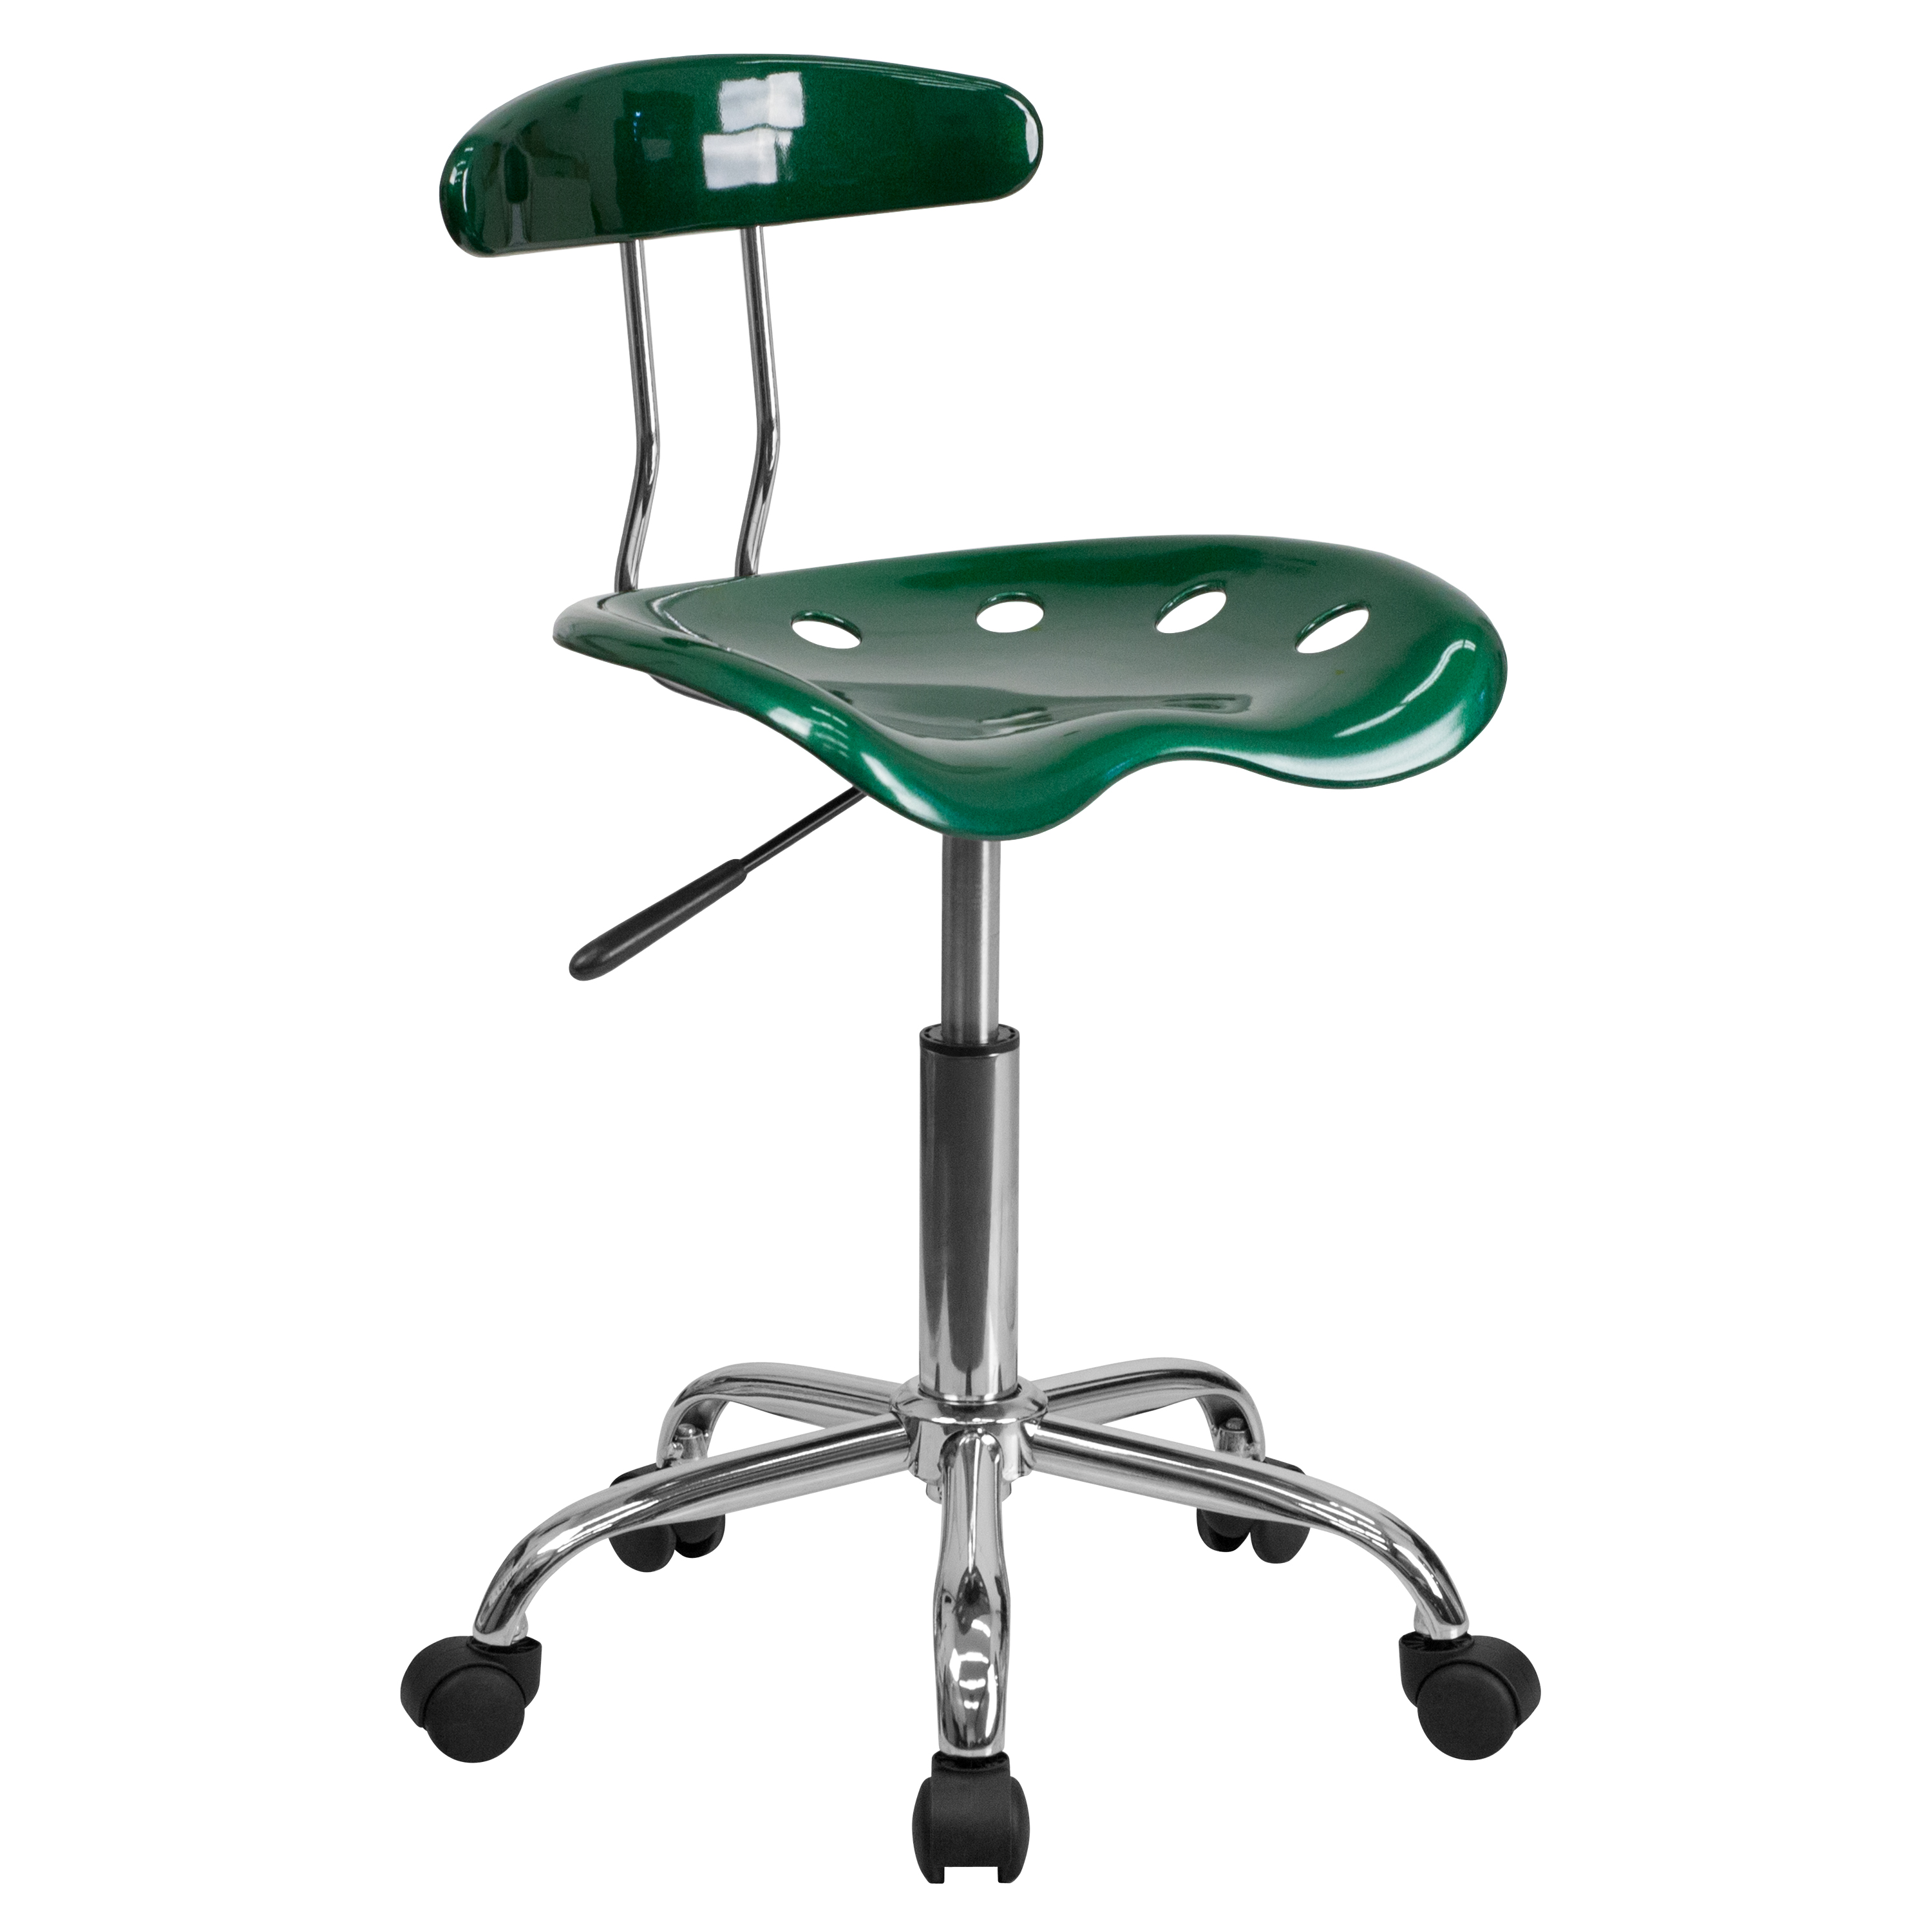 Flash Furniture Vibrant Green and Chrome Swivel Task Office Chair with Tractor Seat - image 2 of 12